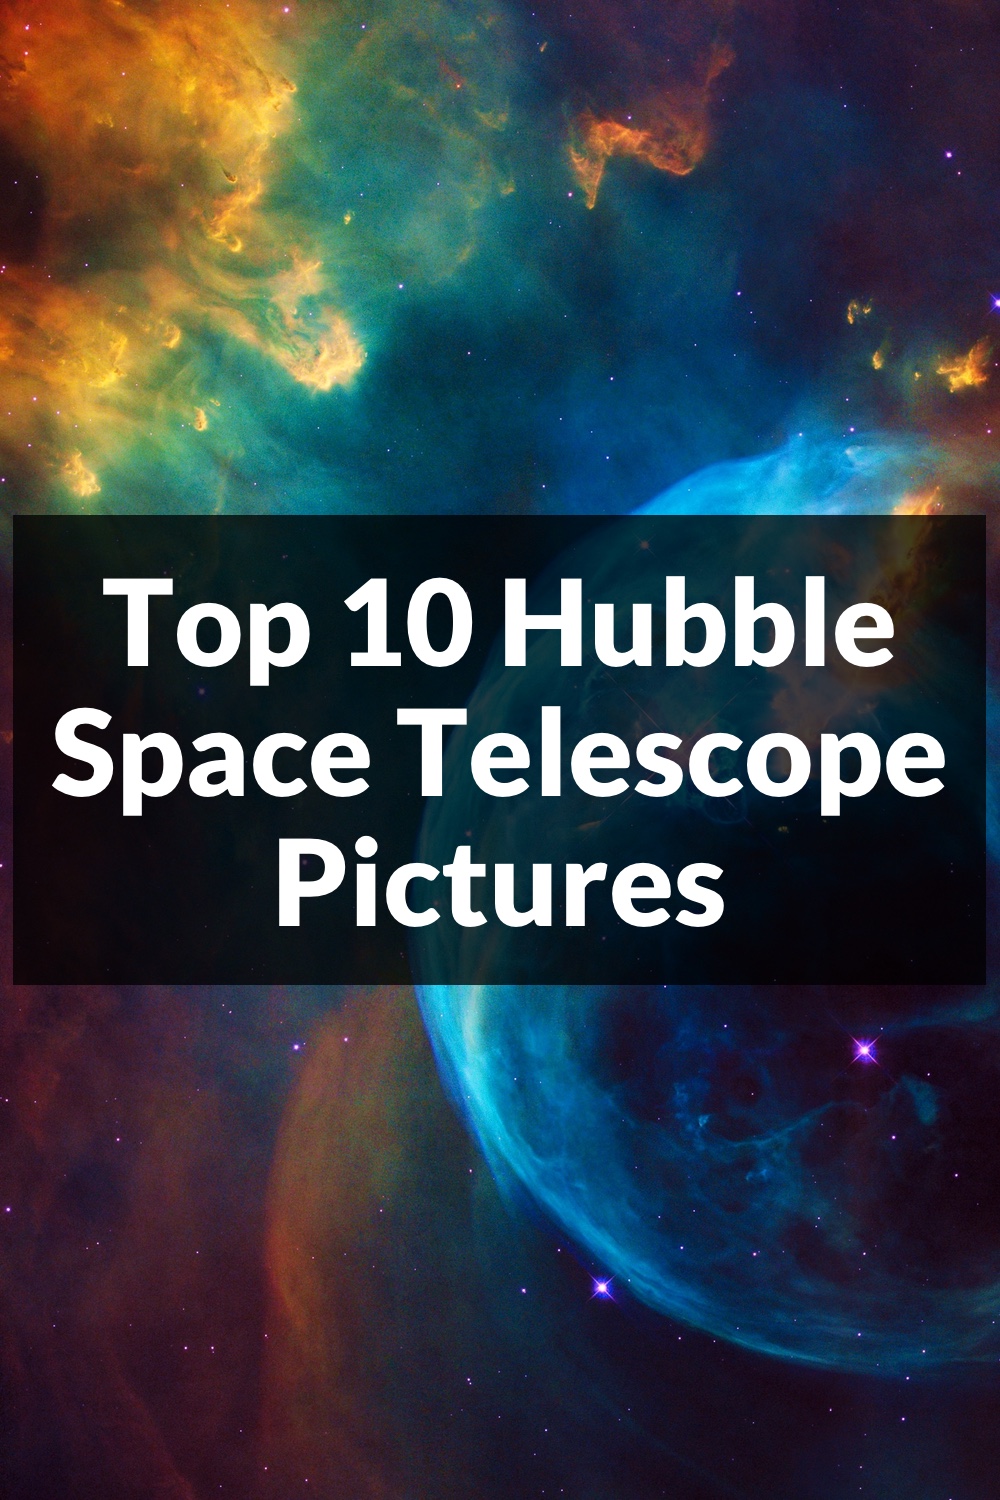 Editor Startpunt Postbode Top 10 Hubble Space Telescope Pictures • Astro Photons